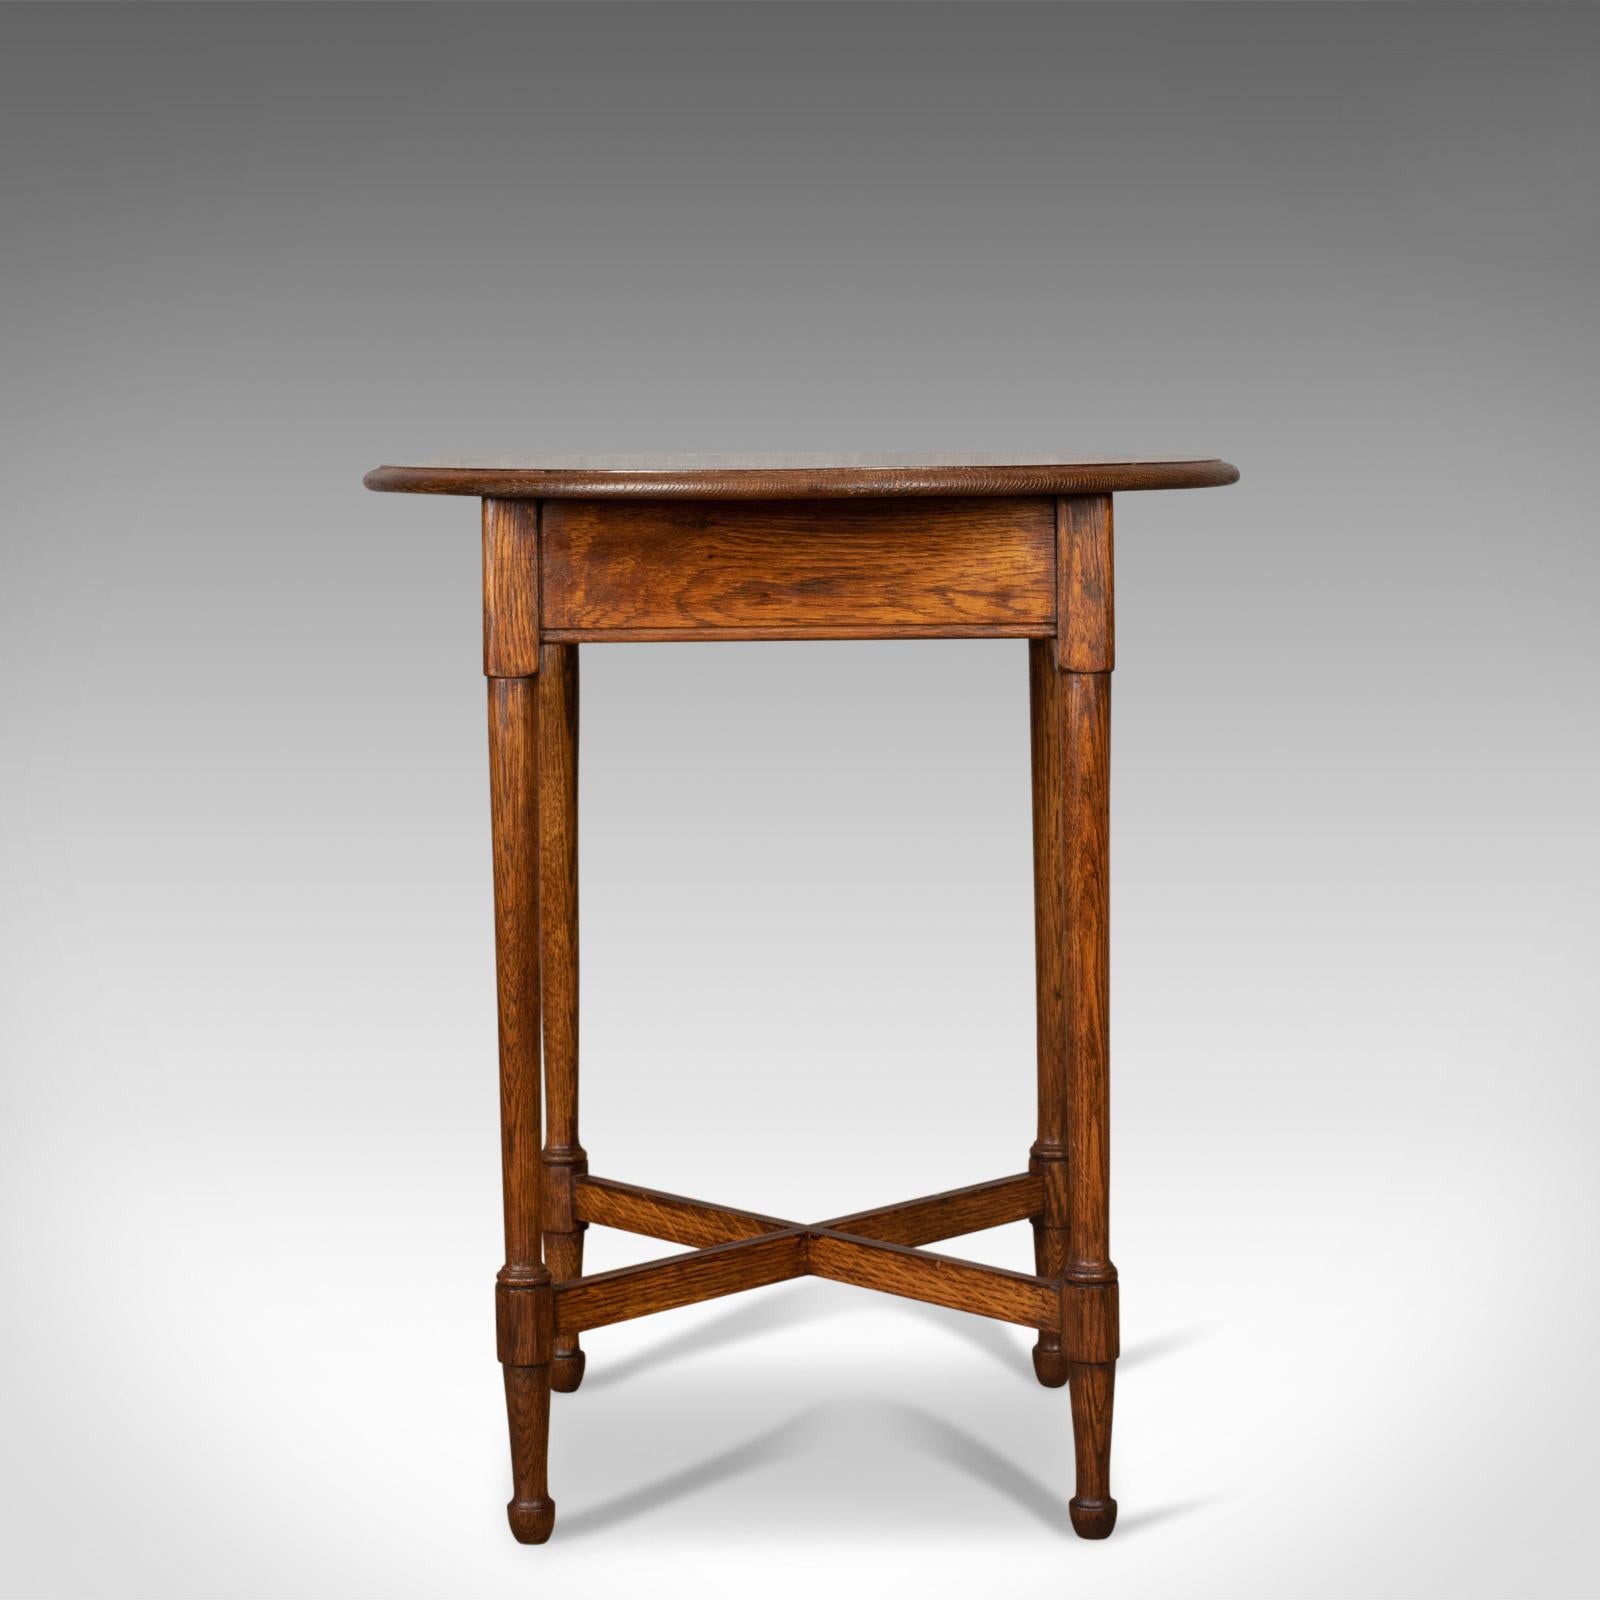 This is an antique side table, an English, Edwardian, oak lamp table dating to the early 20th century, circa 1910.

Appealing biscuit hues to the English oak
Displaying grain interest and wisps of medullary rays
Desirable aged patina with a